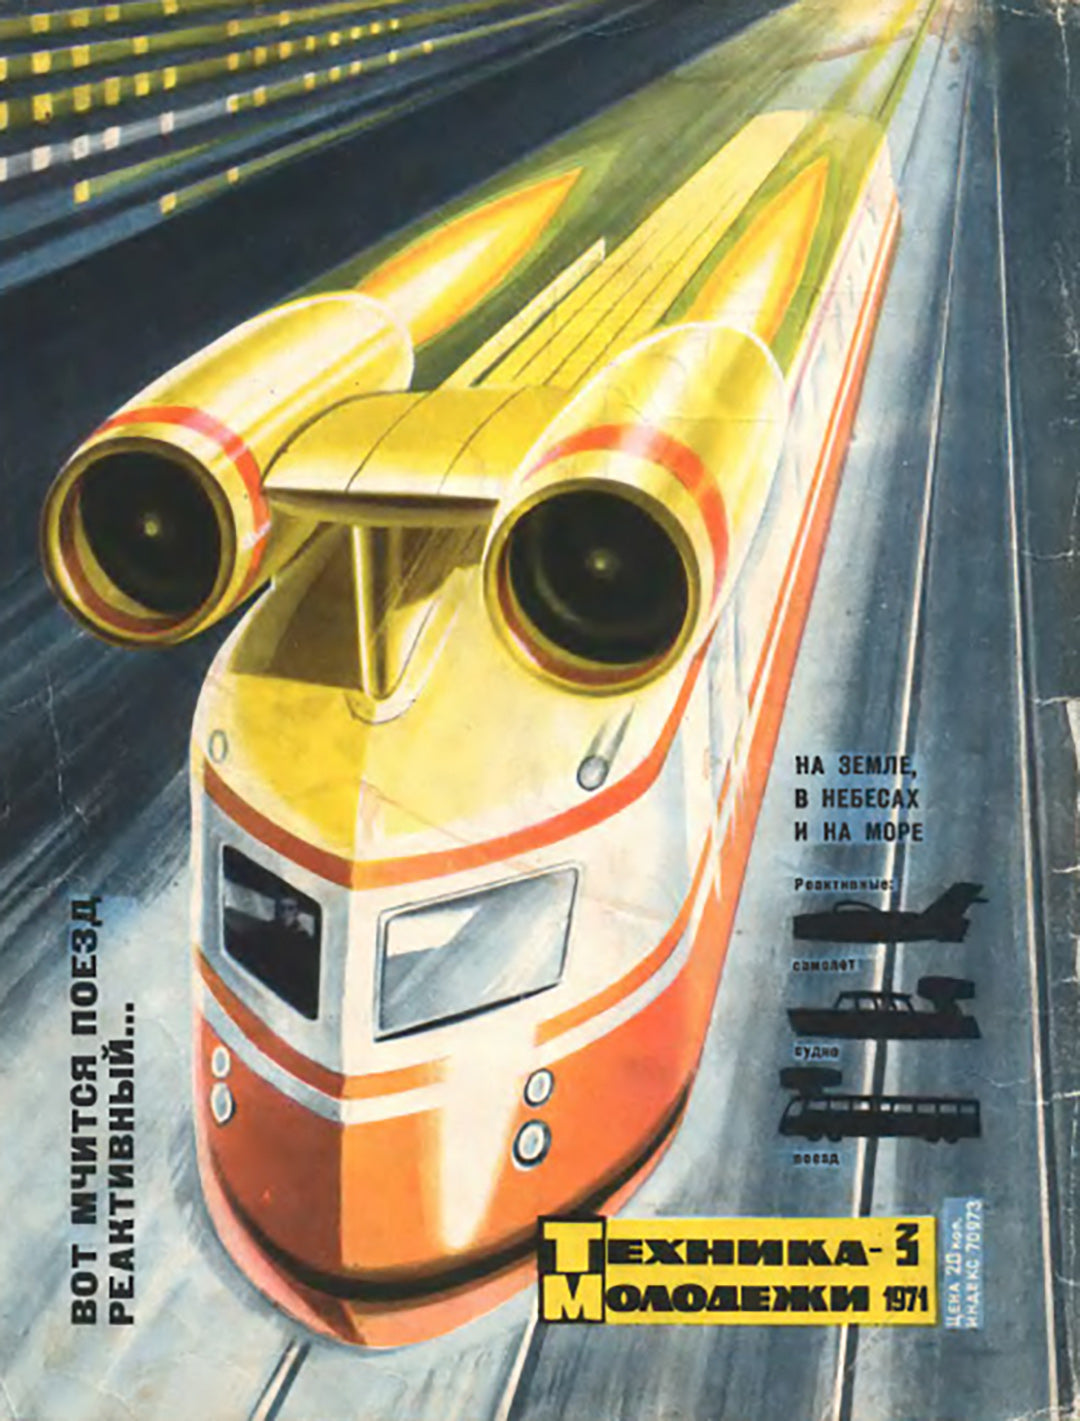 Illustration depicting the SVL from 1971 in "TM Magazine", found on different websites, no other source available